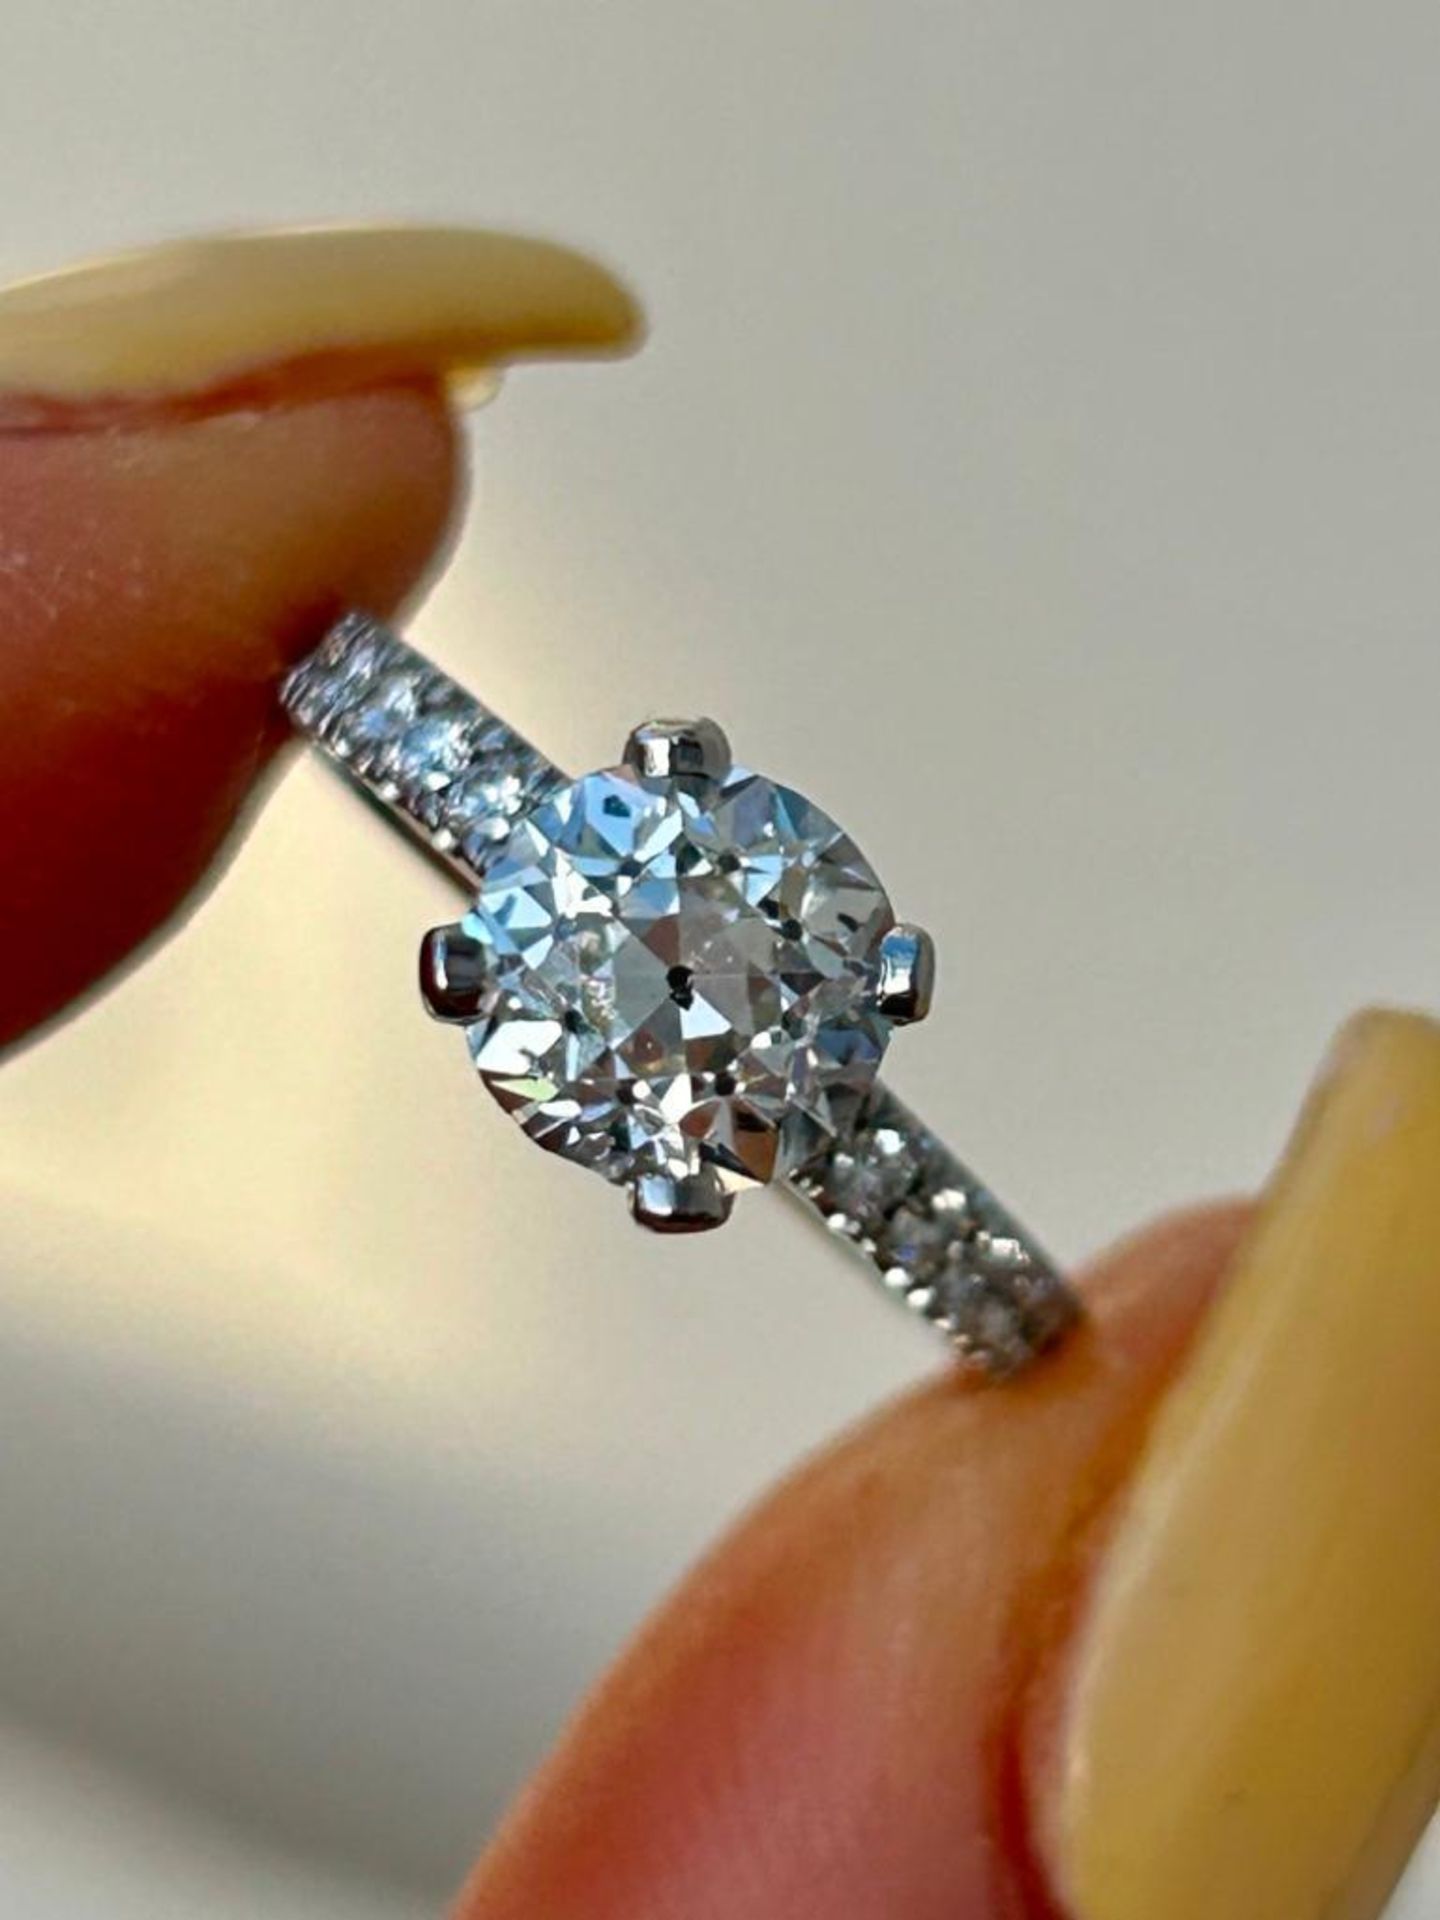 Outstanding Platinum 1.63 Carat Centre Stone Diamond Solitaire Engagement Style Ring - Image 6 of 11